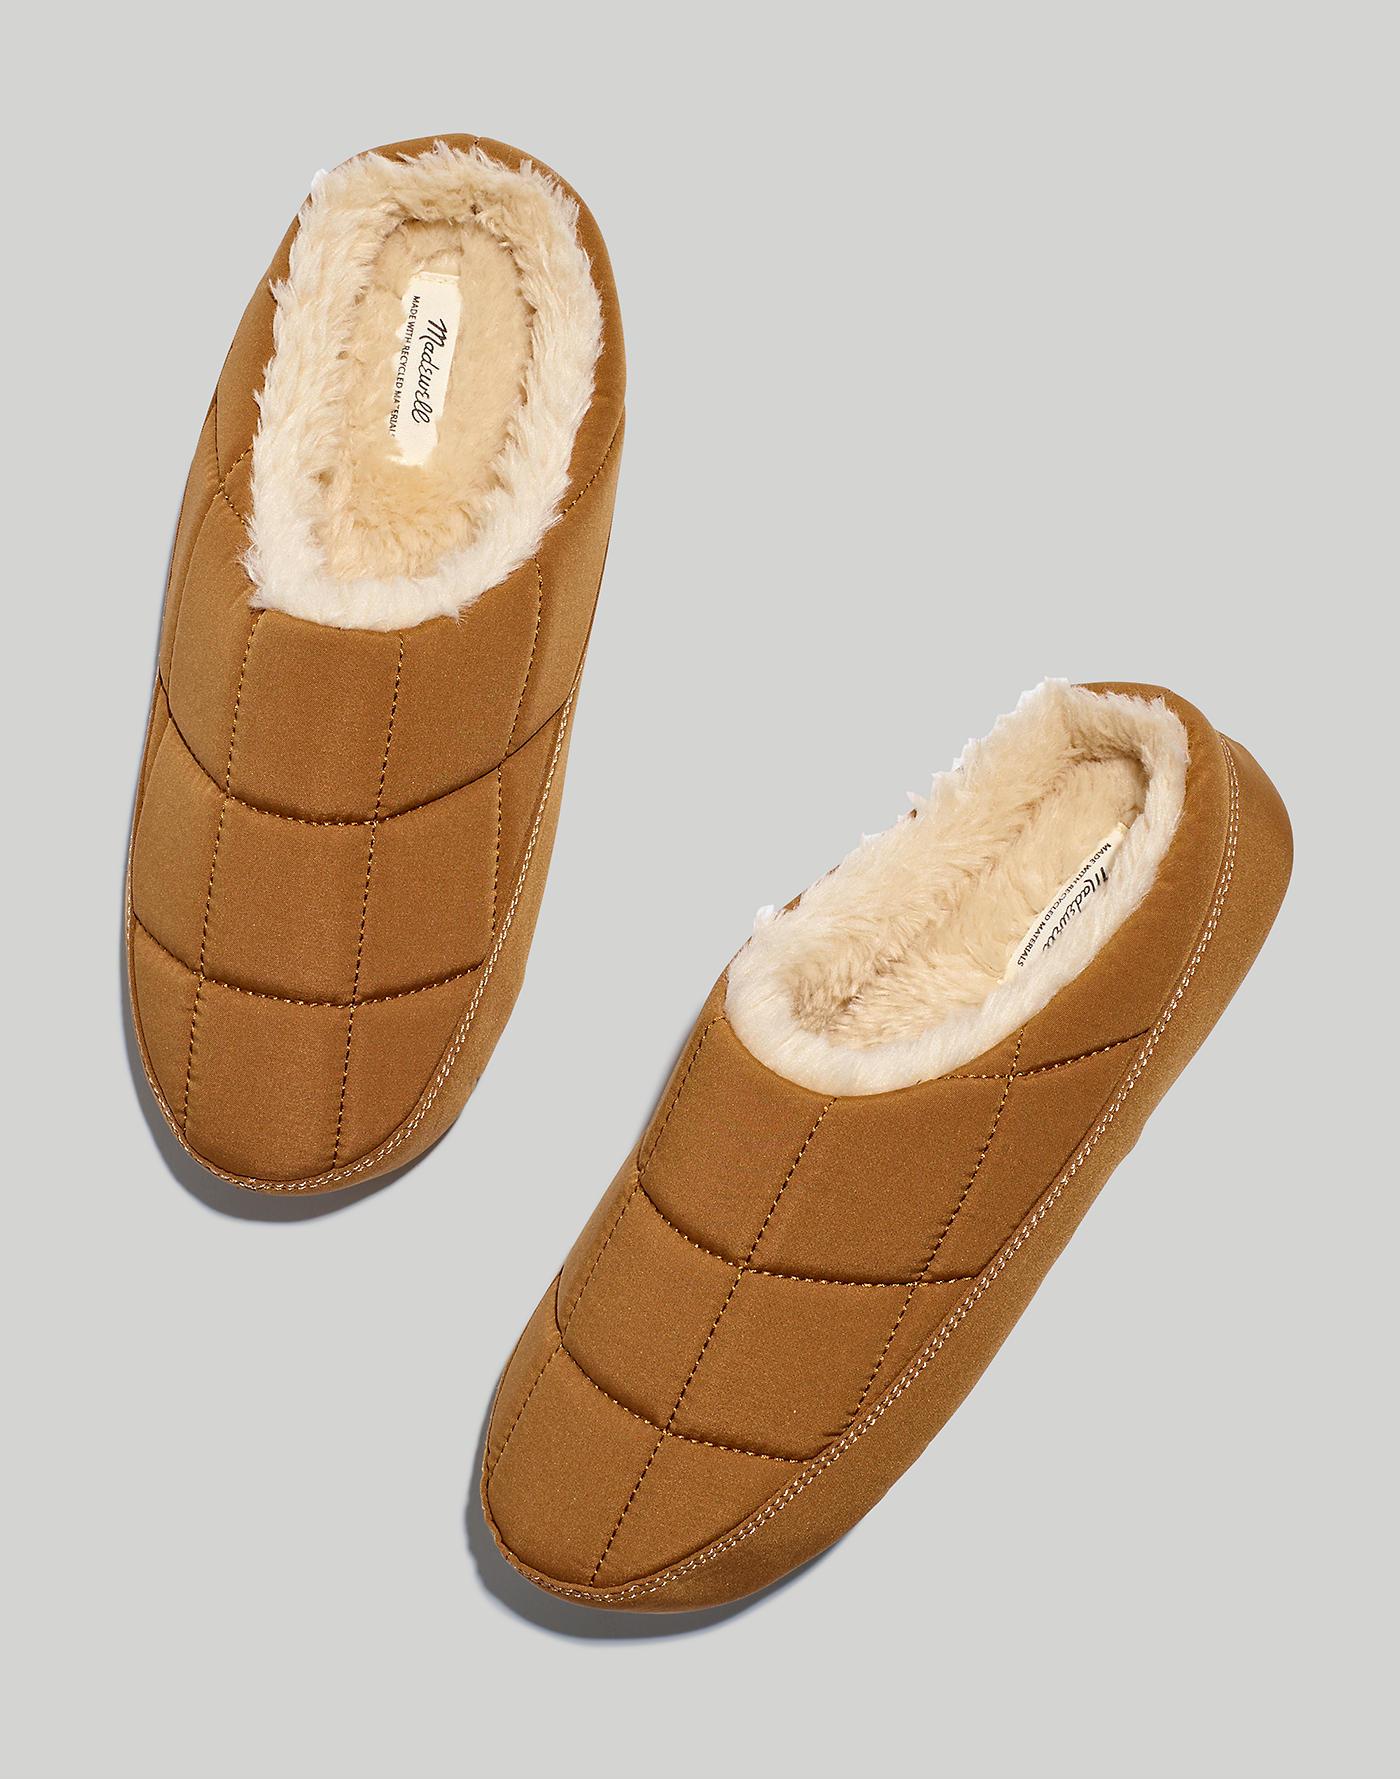 MW The Quilted Jacqueline Slipper In Recycled Nylon in Natural | Lyst